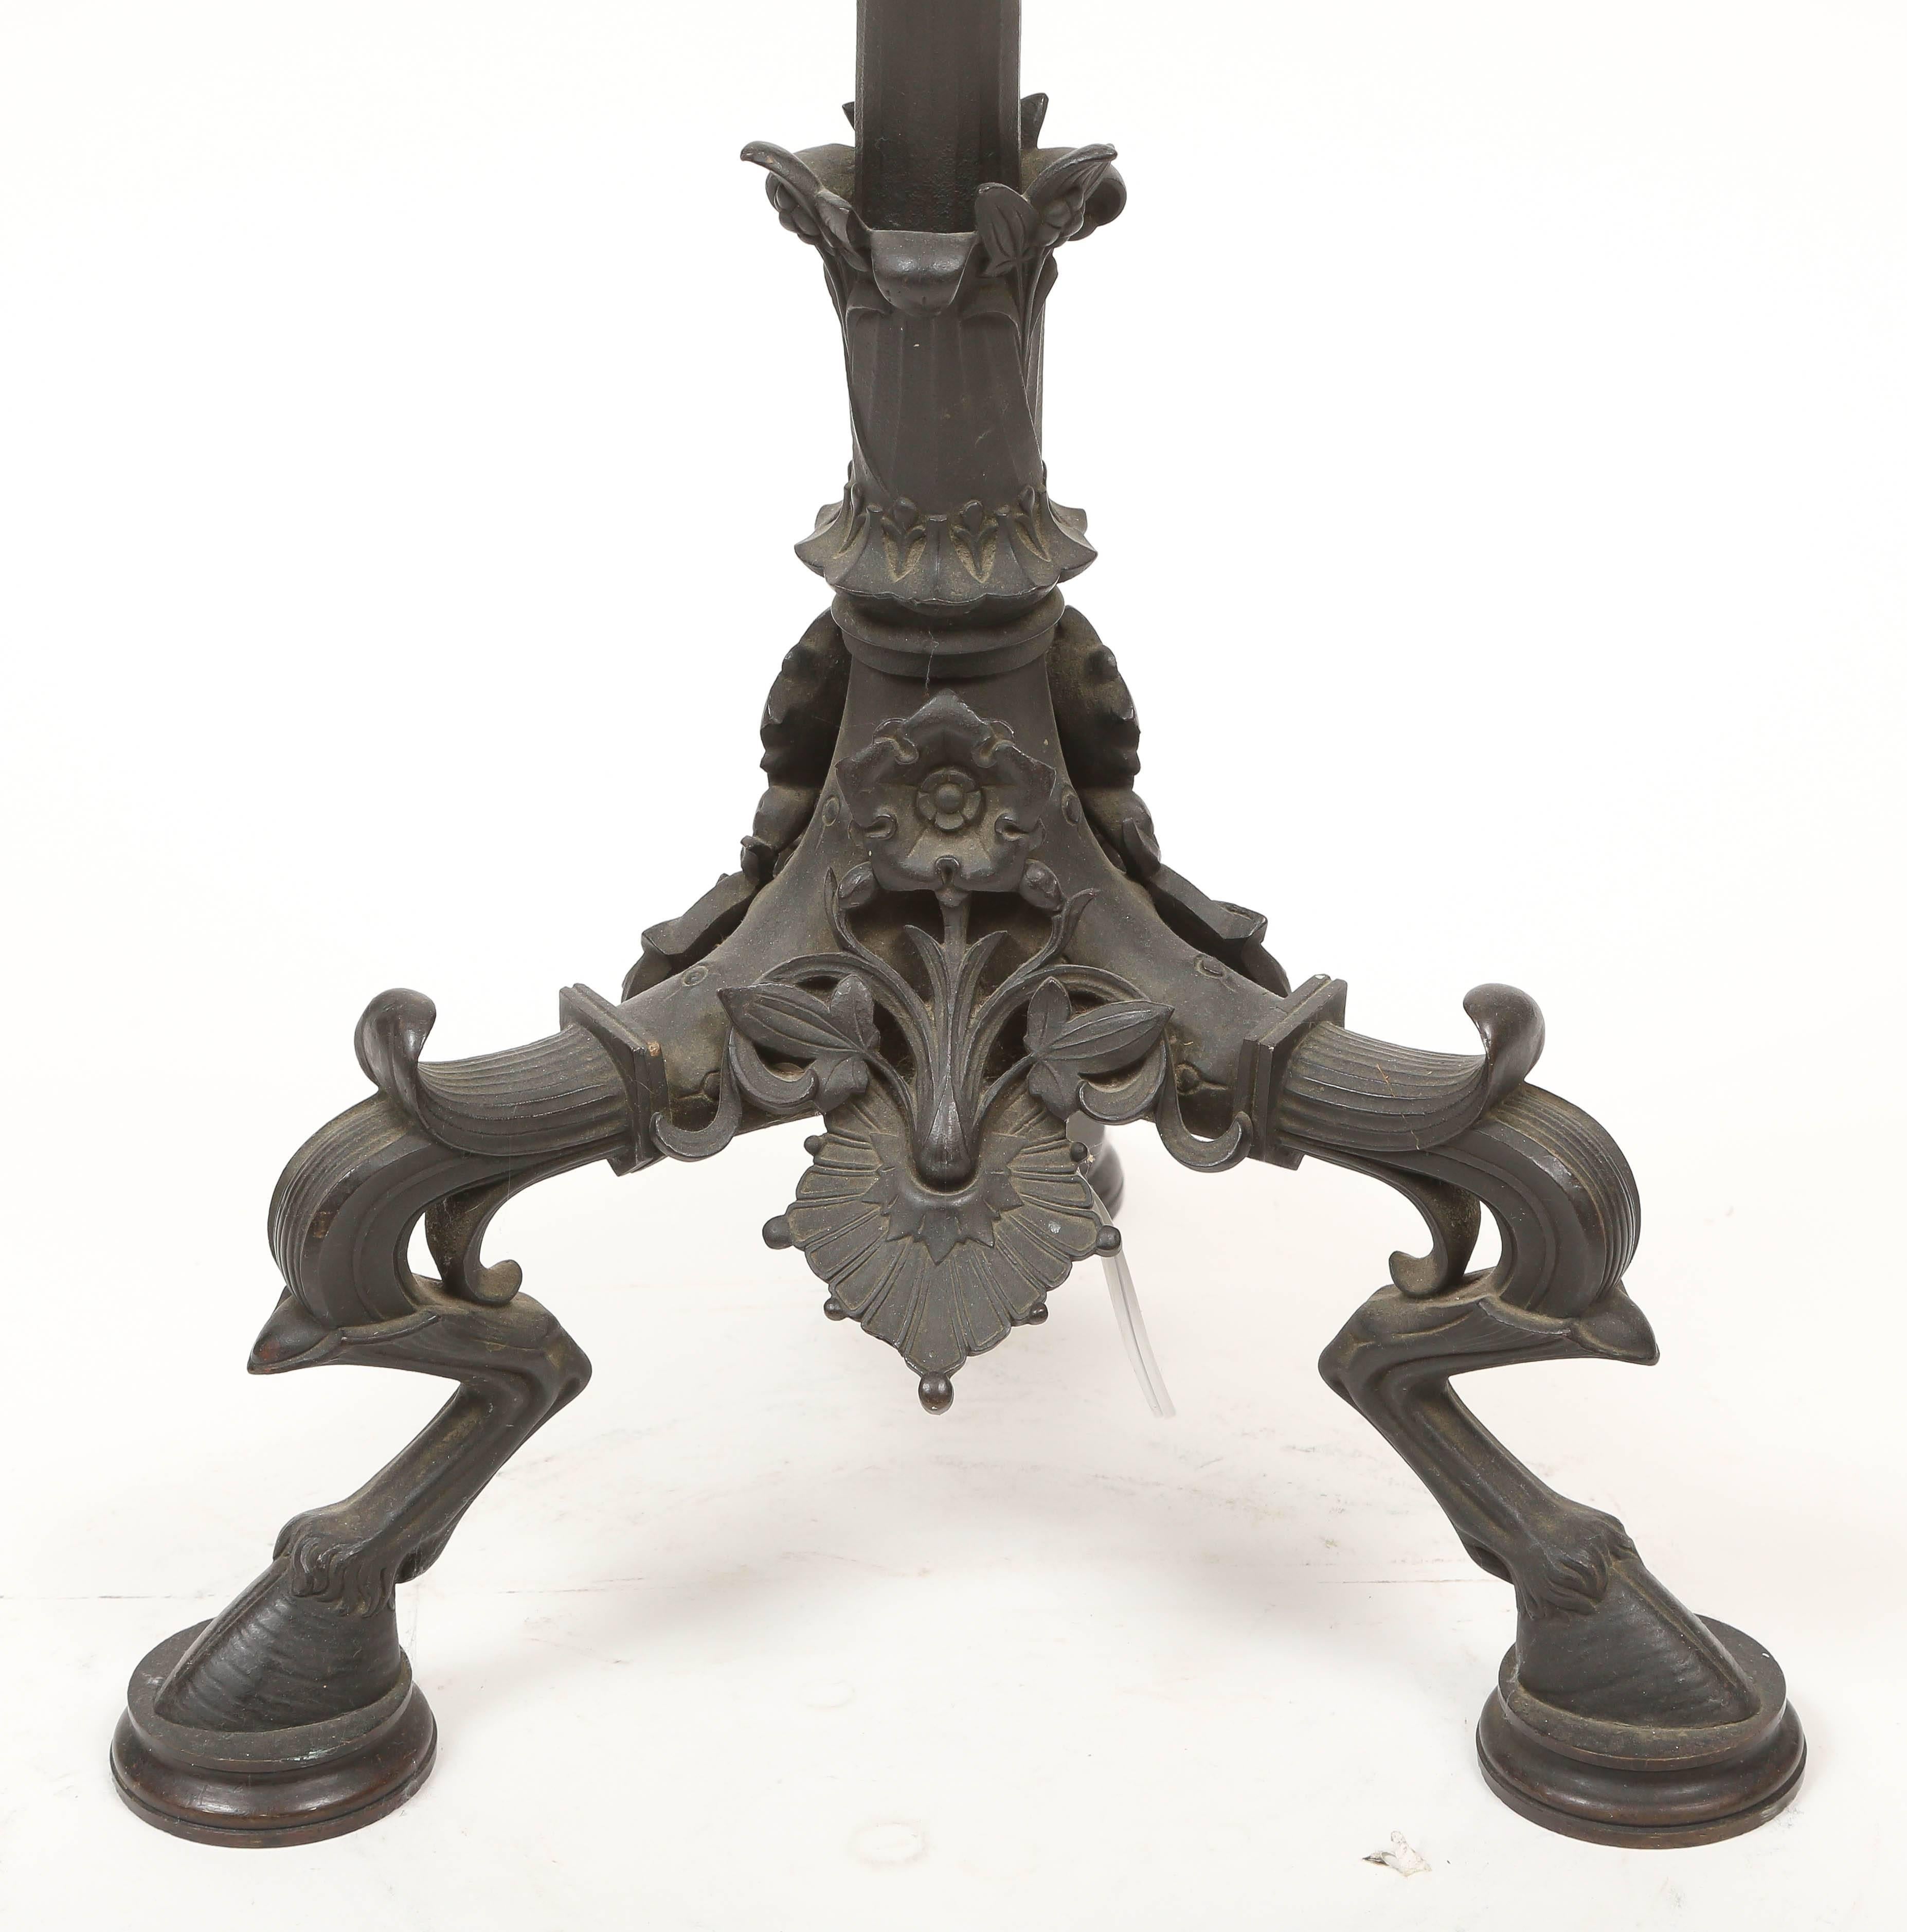 Rare tripod floor lamp in the Pompeiian style attributed to the Caldwell & Company foundry. Patinated bronze verdigris finish. Electrified with two sockets.